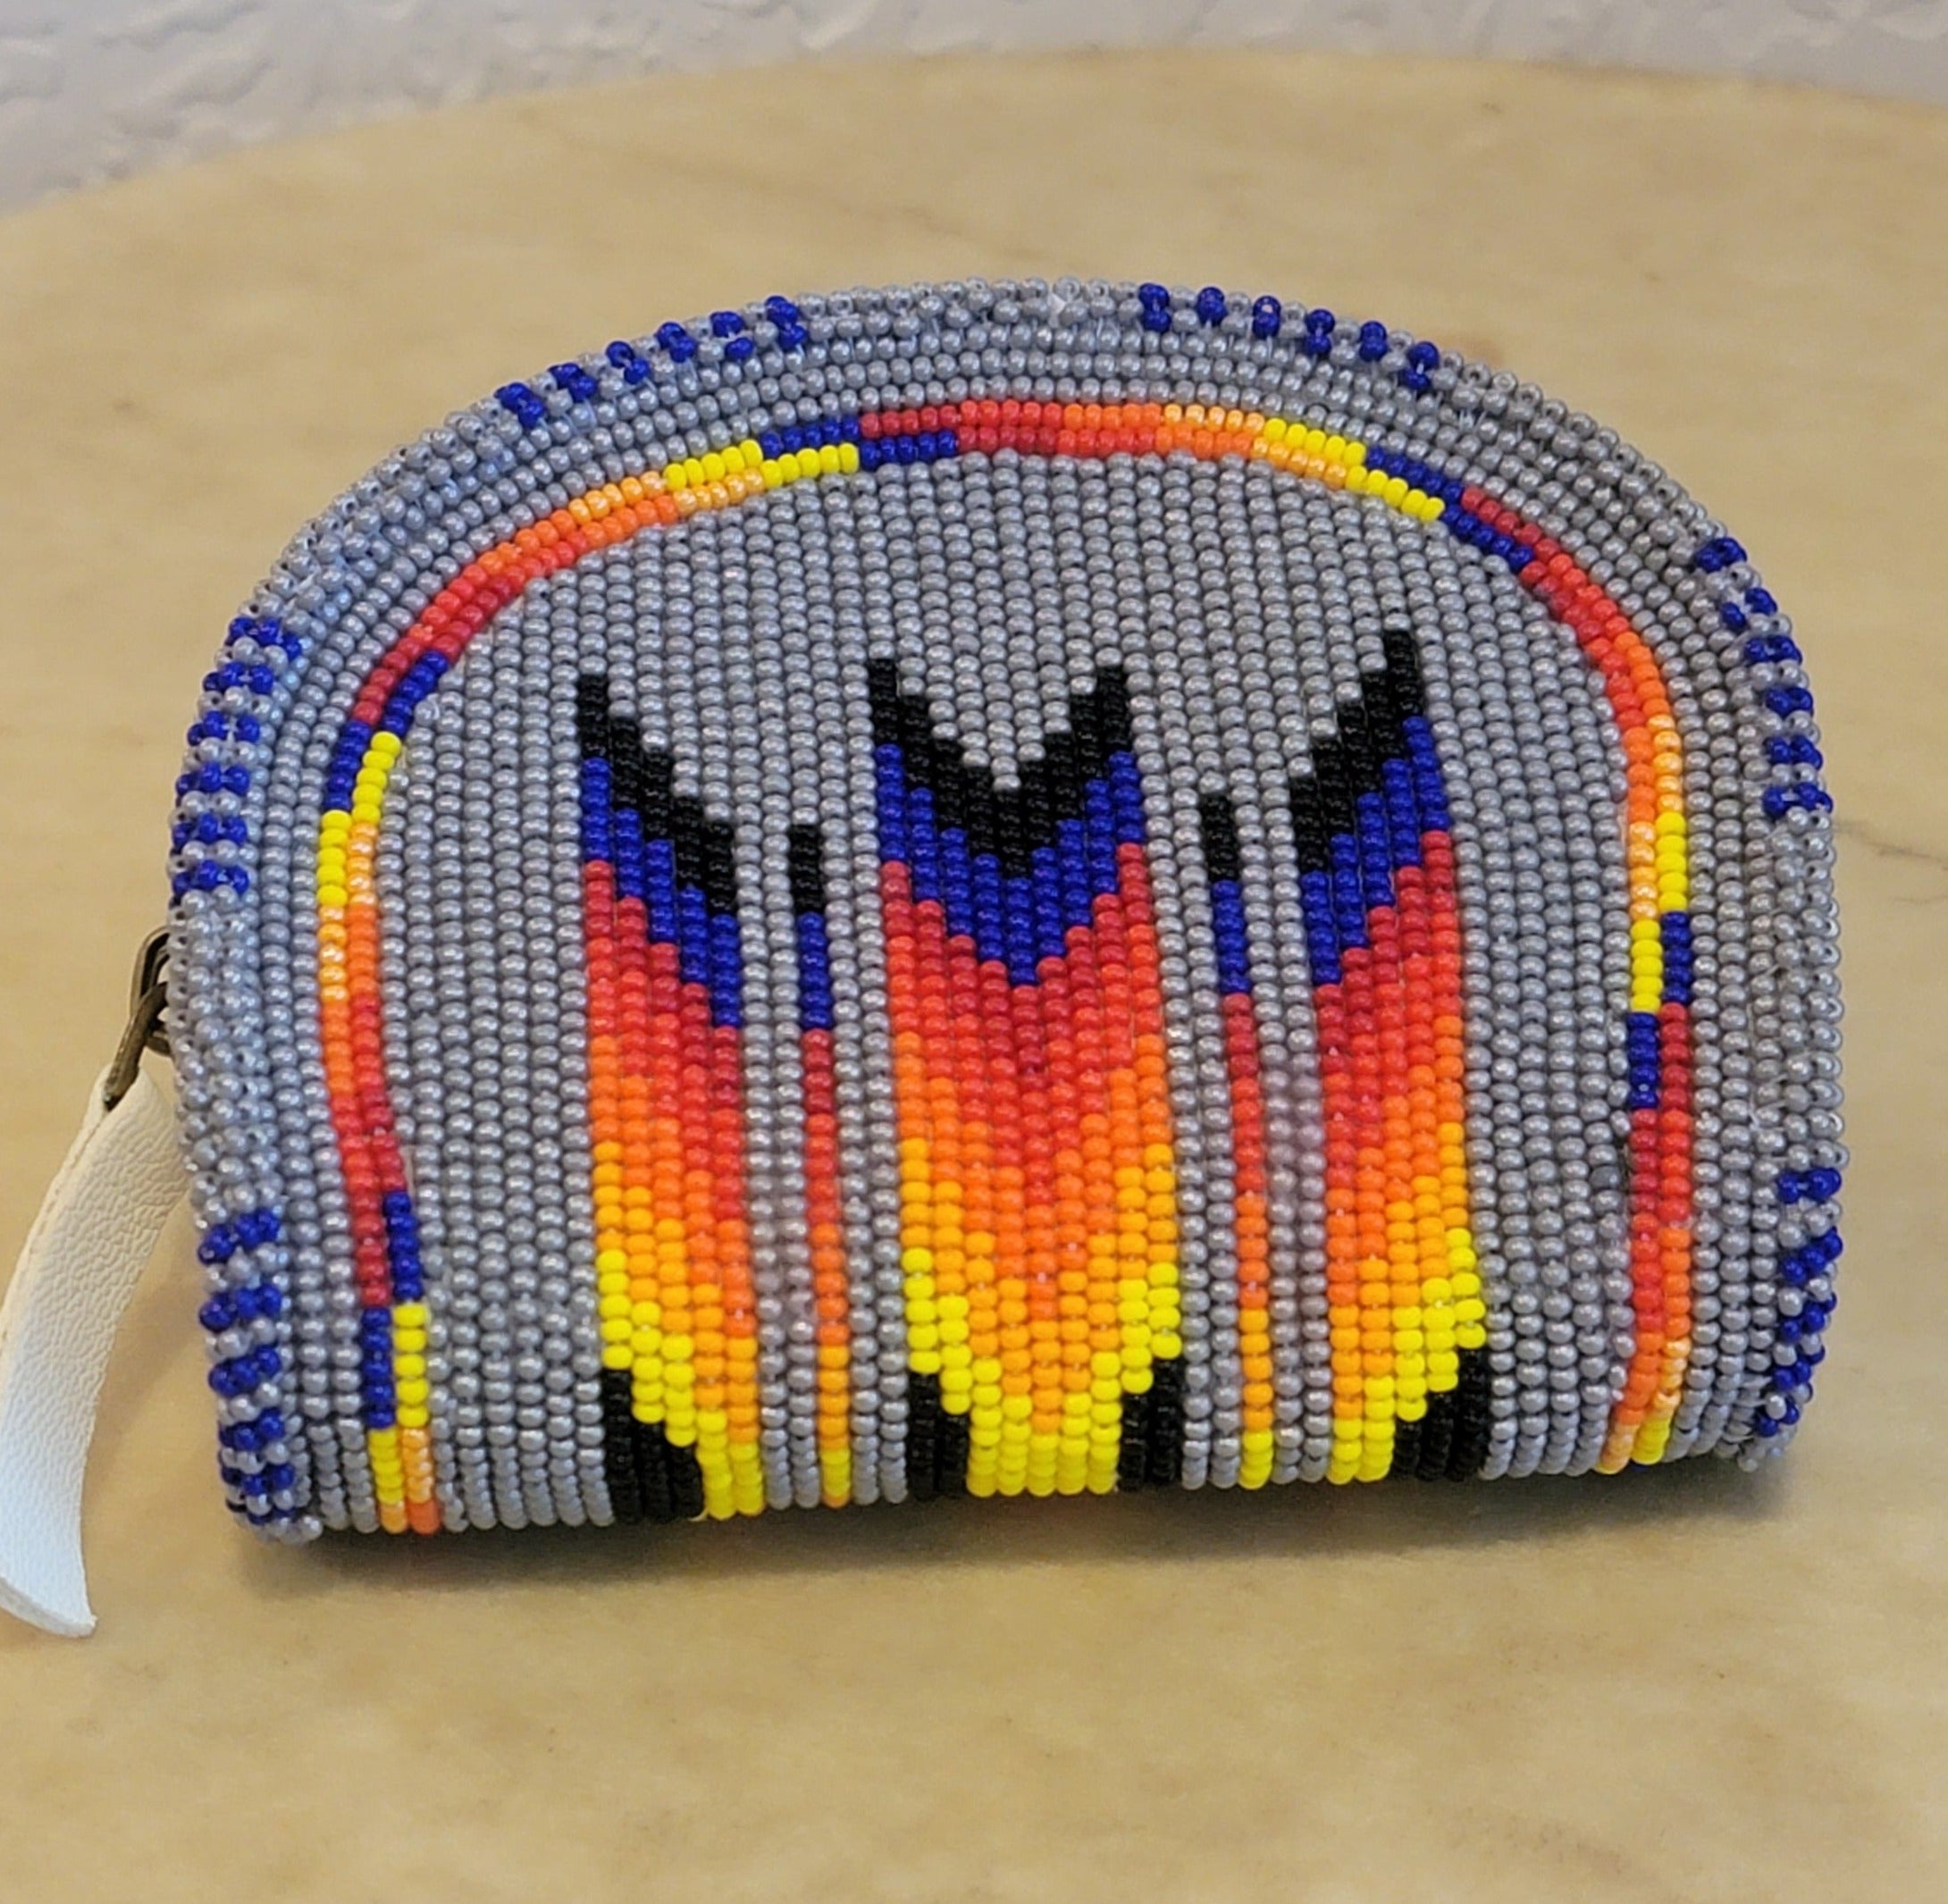 Amazon.com : Native American Indian Warrior Canvas Coin Purse Pouch Change  Cash Wallet Cosmetic Makeup Bag for Money Pen Organizer : Sports & Outdoors